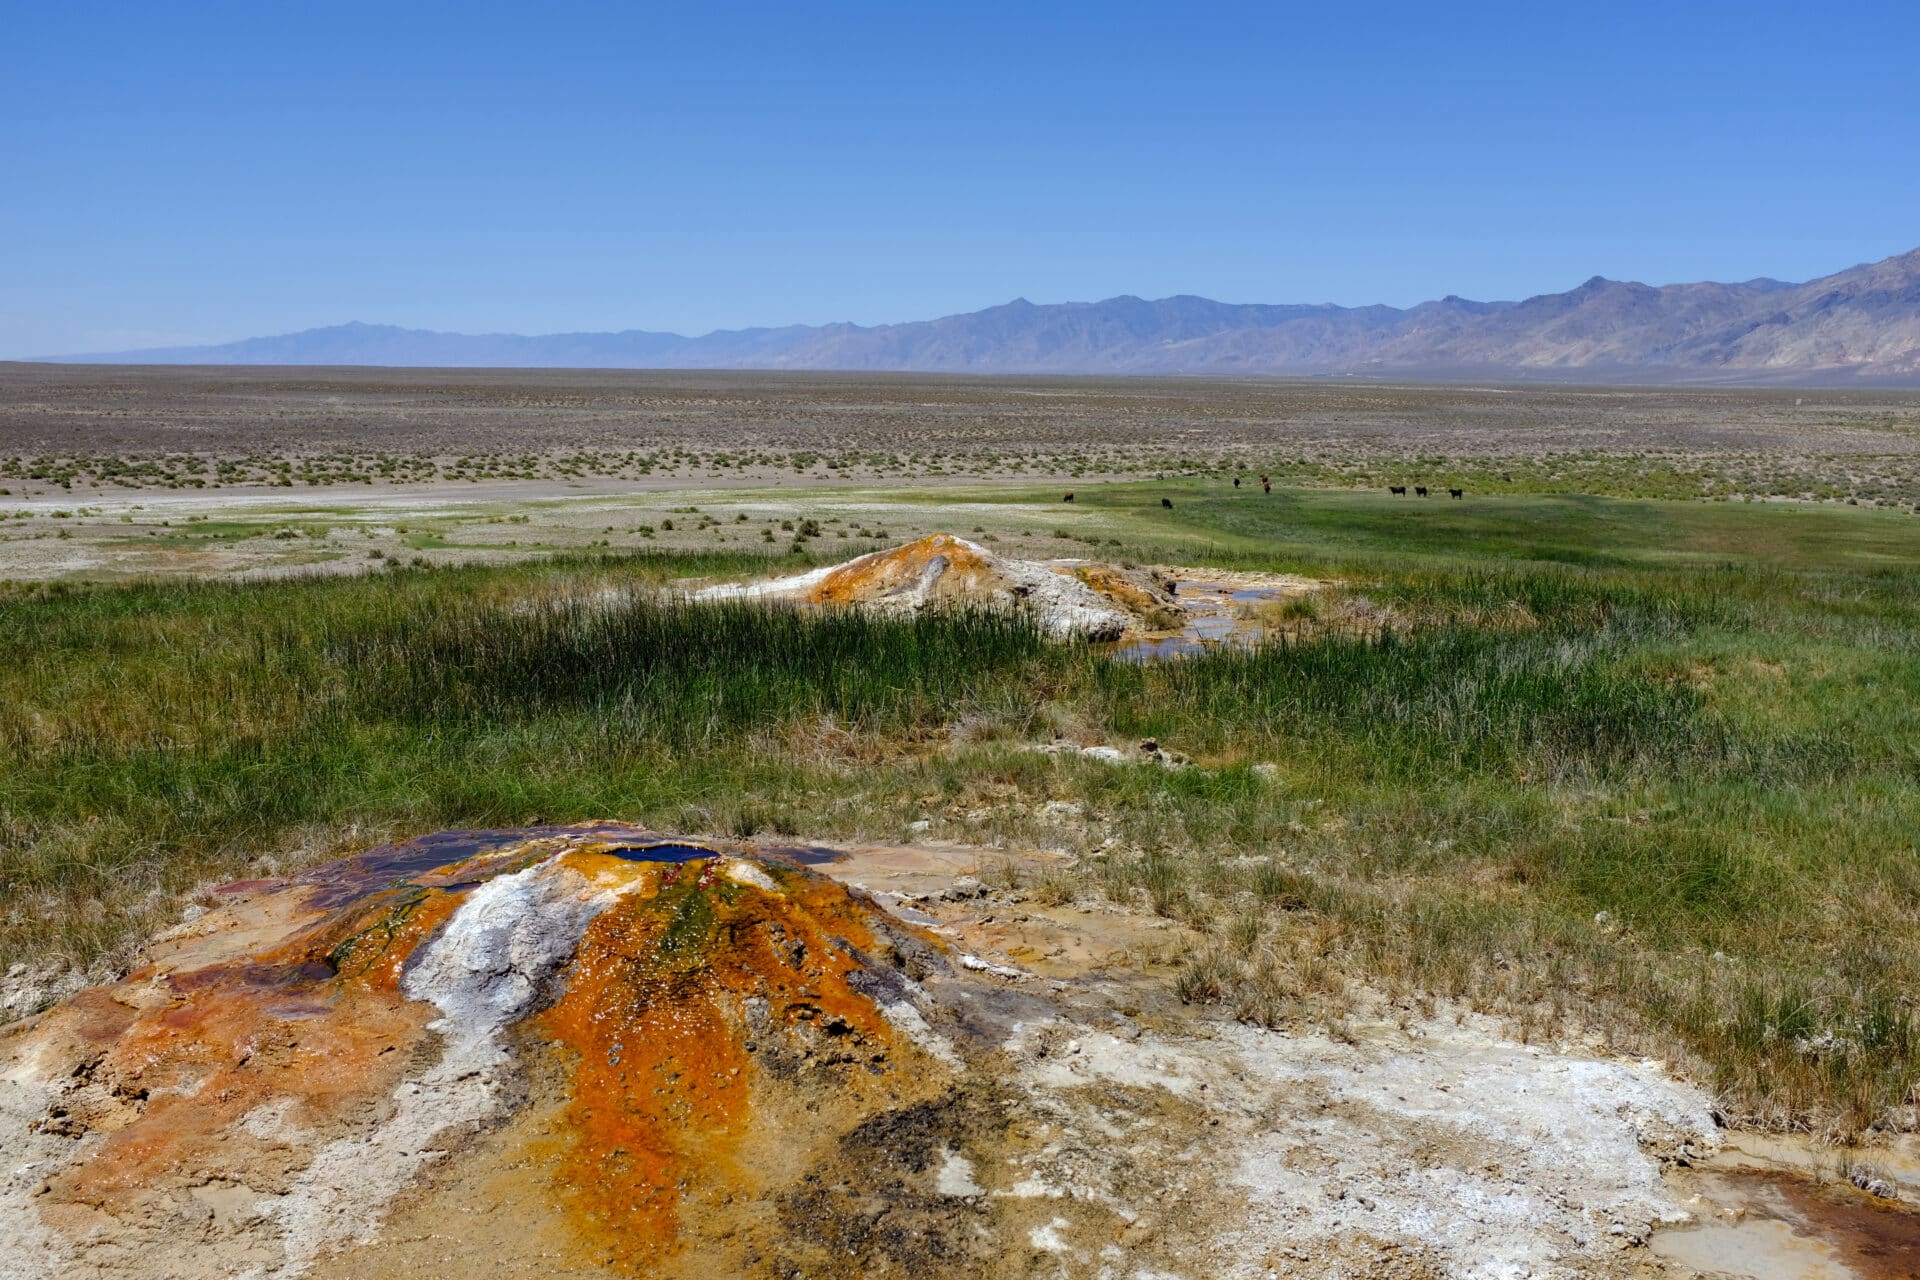 Travertine cones at Hyder Hot Springs in Dixie Valley. Historically, the easiest way to find geothermal reservoirs was to look for obvious surface expressions like these. (Jessica McKenzie)